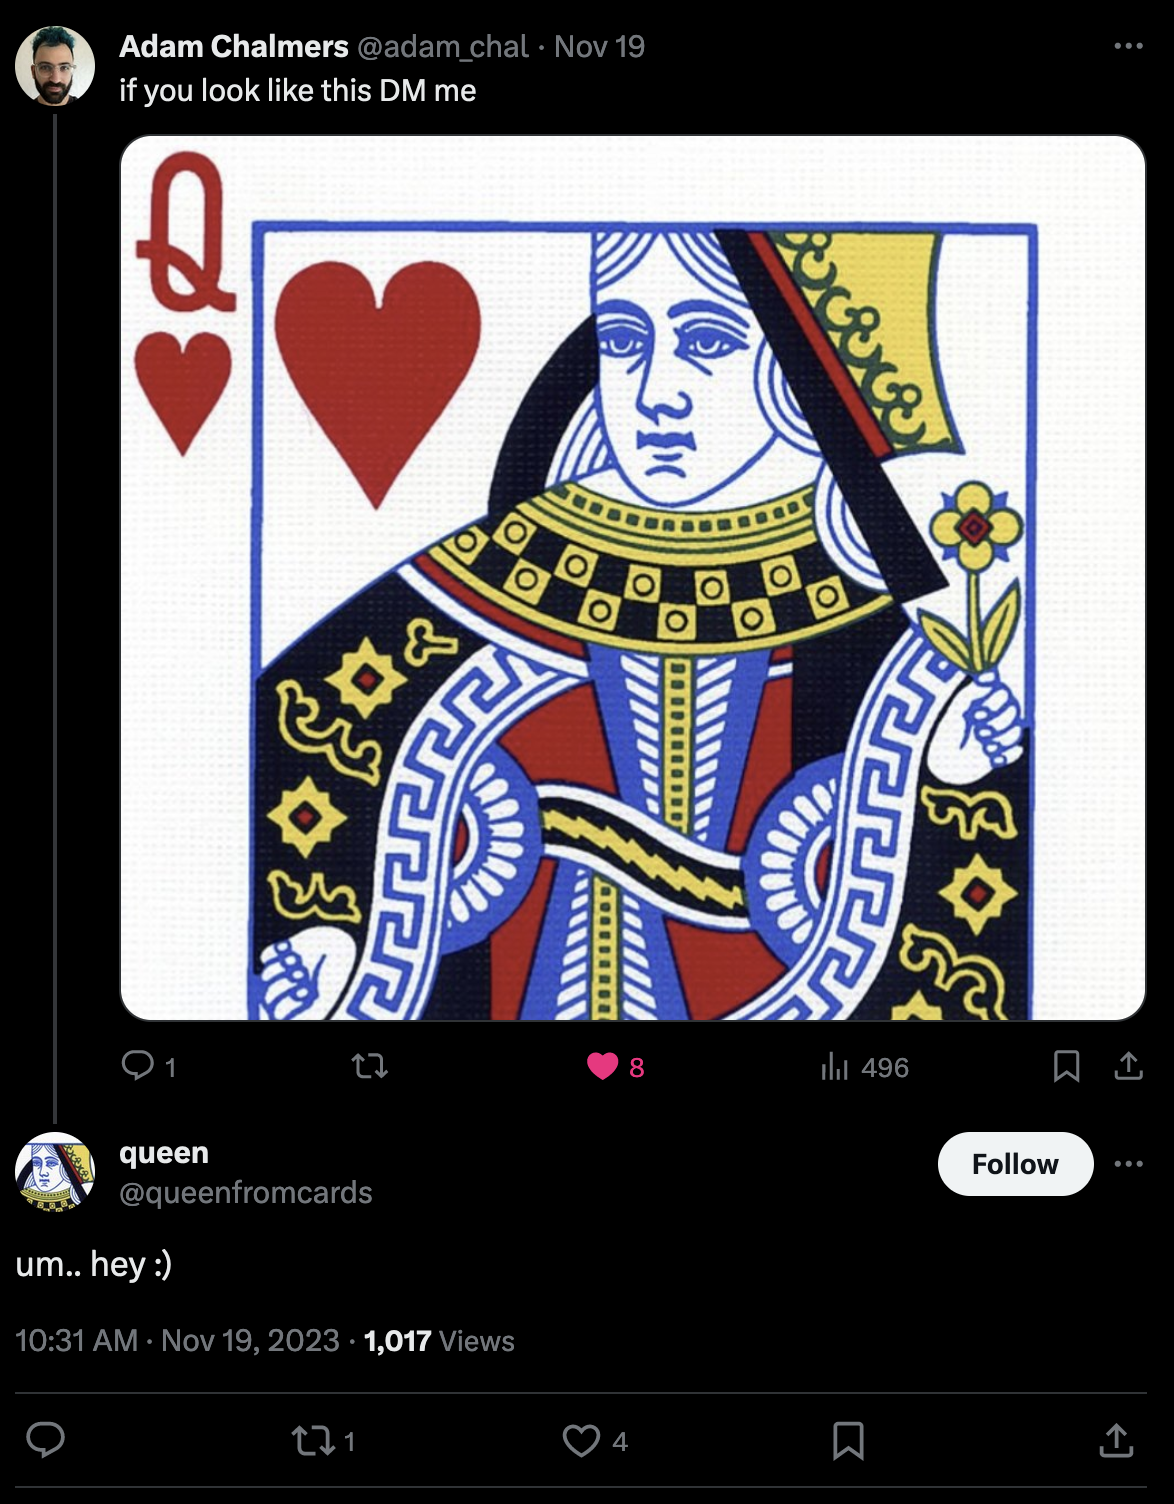 My tweet is a picture of the Queen of Hearts playing card, captioned "if you look like this DM me". Someone called "Queen from cards" whose profile pic is exactly that replies saying "um... hey :)"